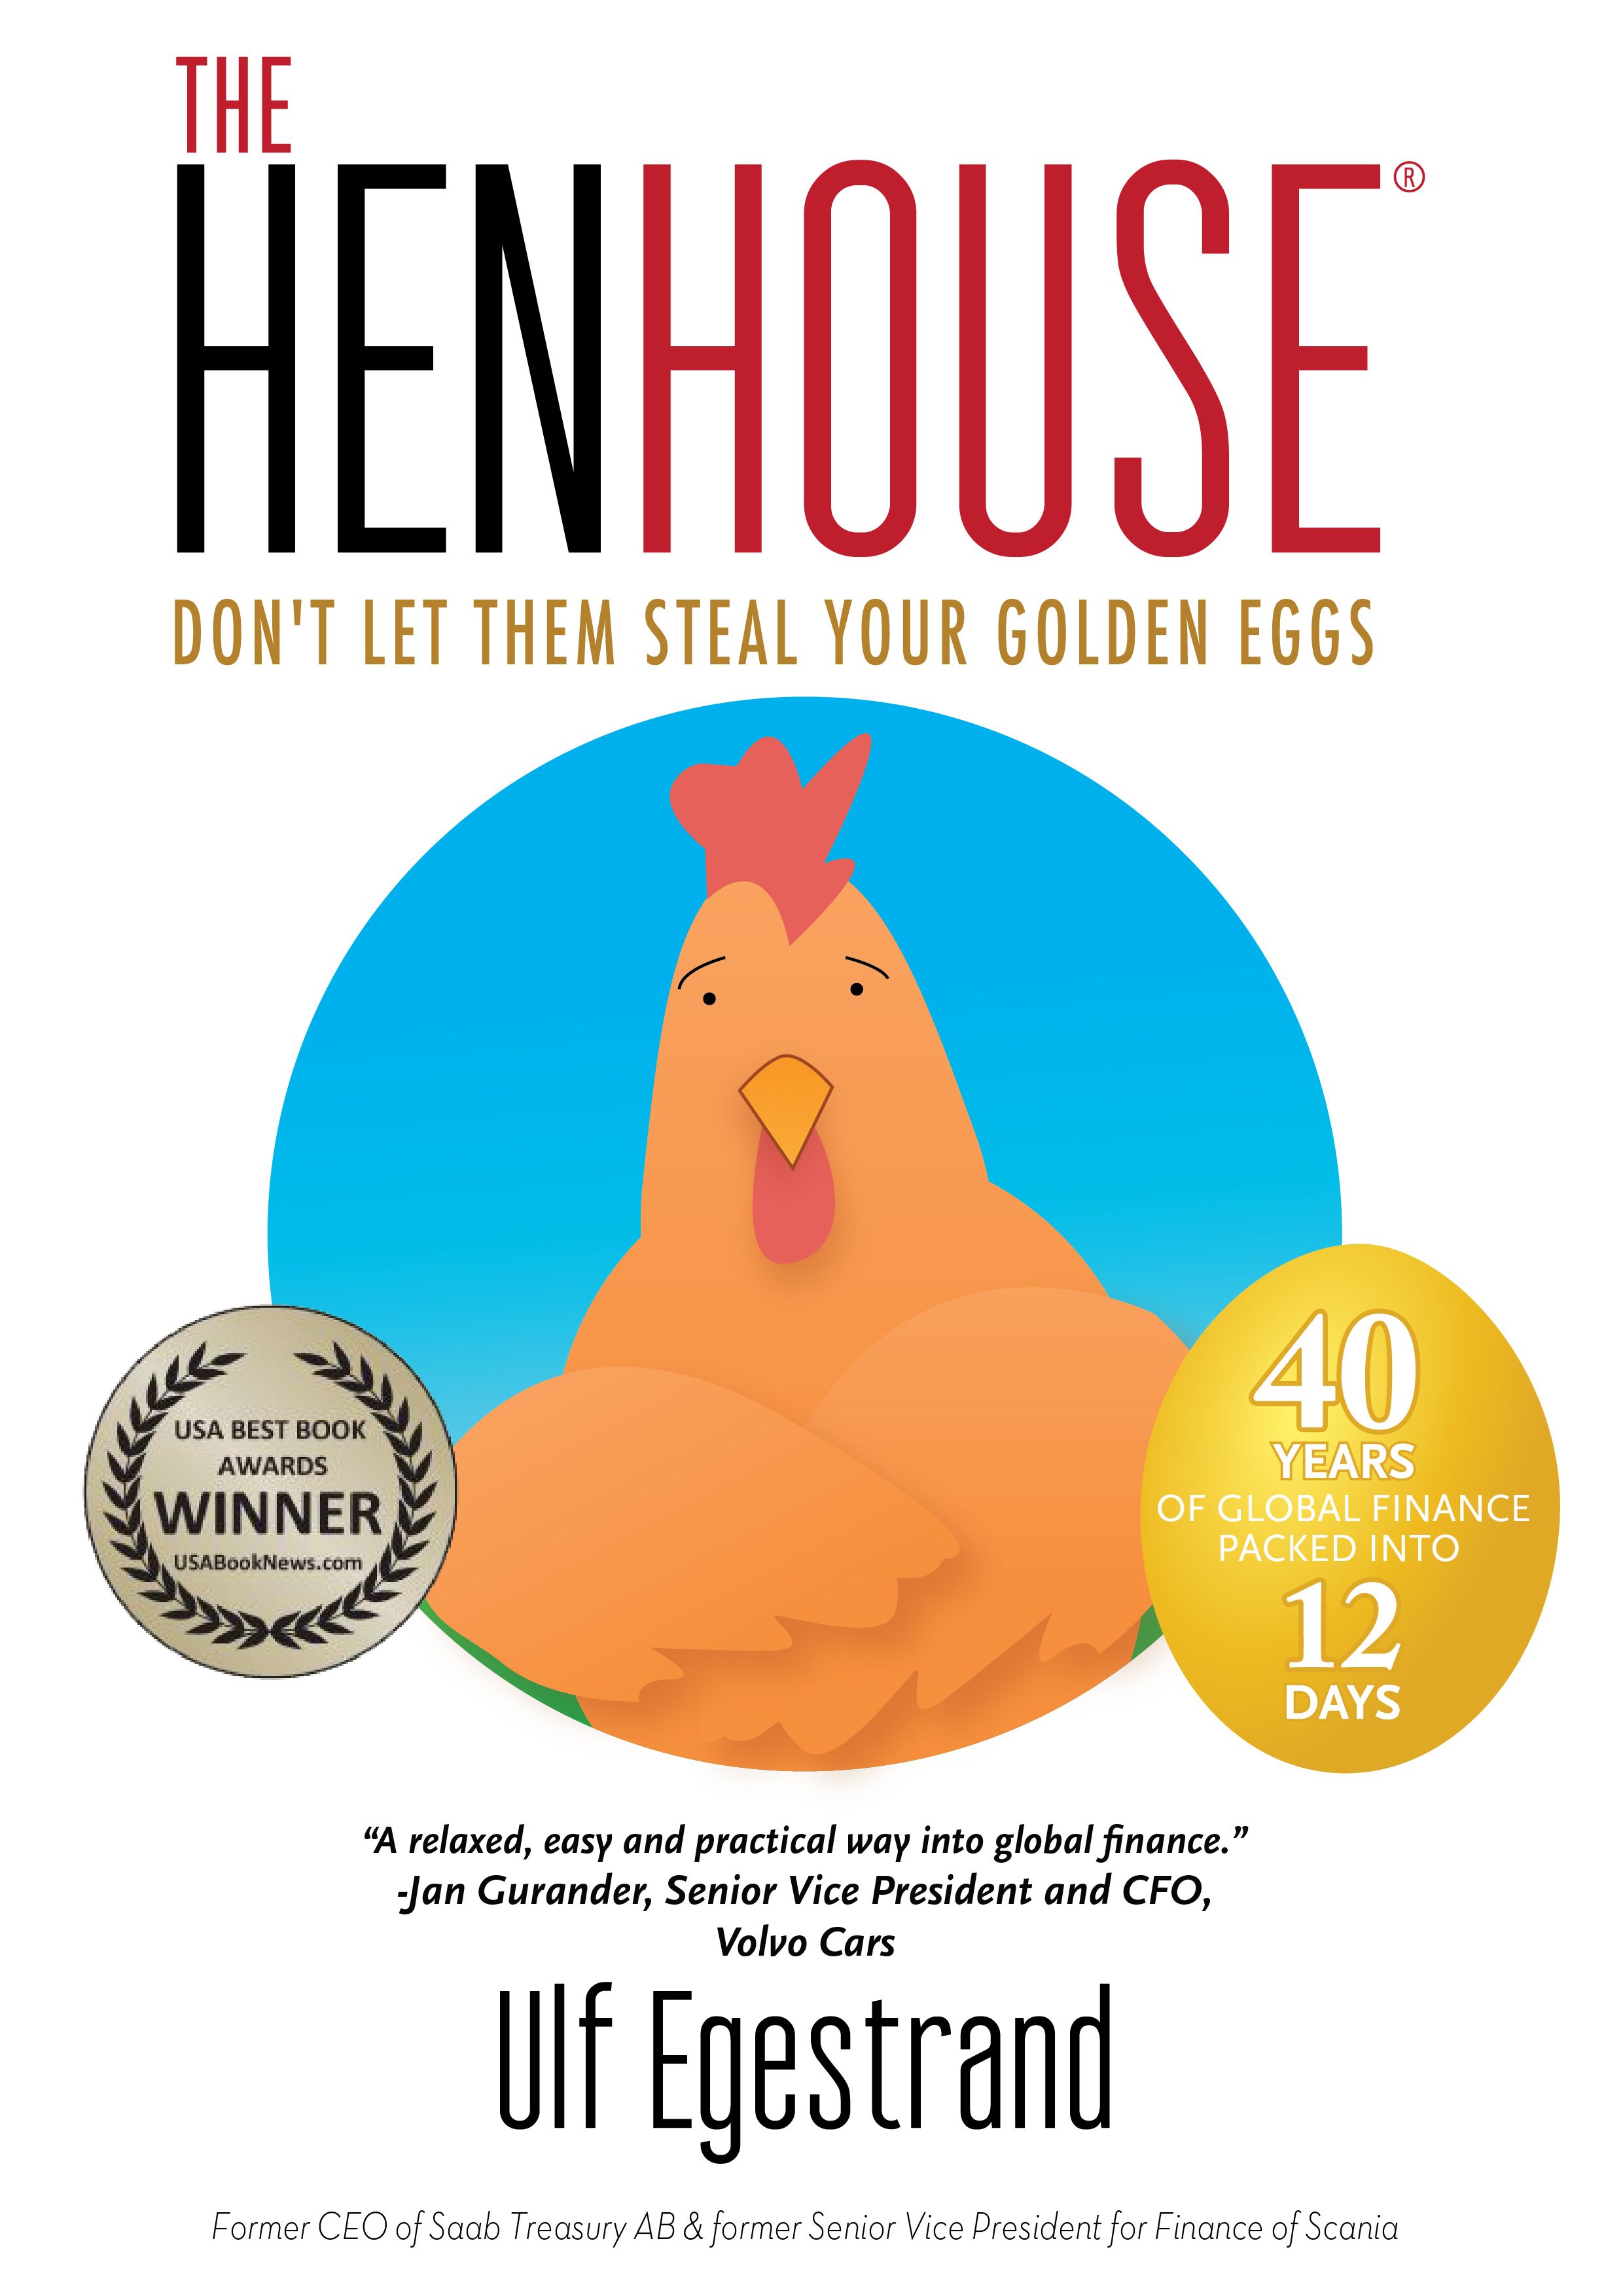 The Henhouse - Dont' let them steal your golden eggs., eBook by Ulf Egestrand, Jennifer Nicholsson-Breen